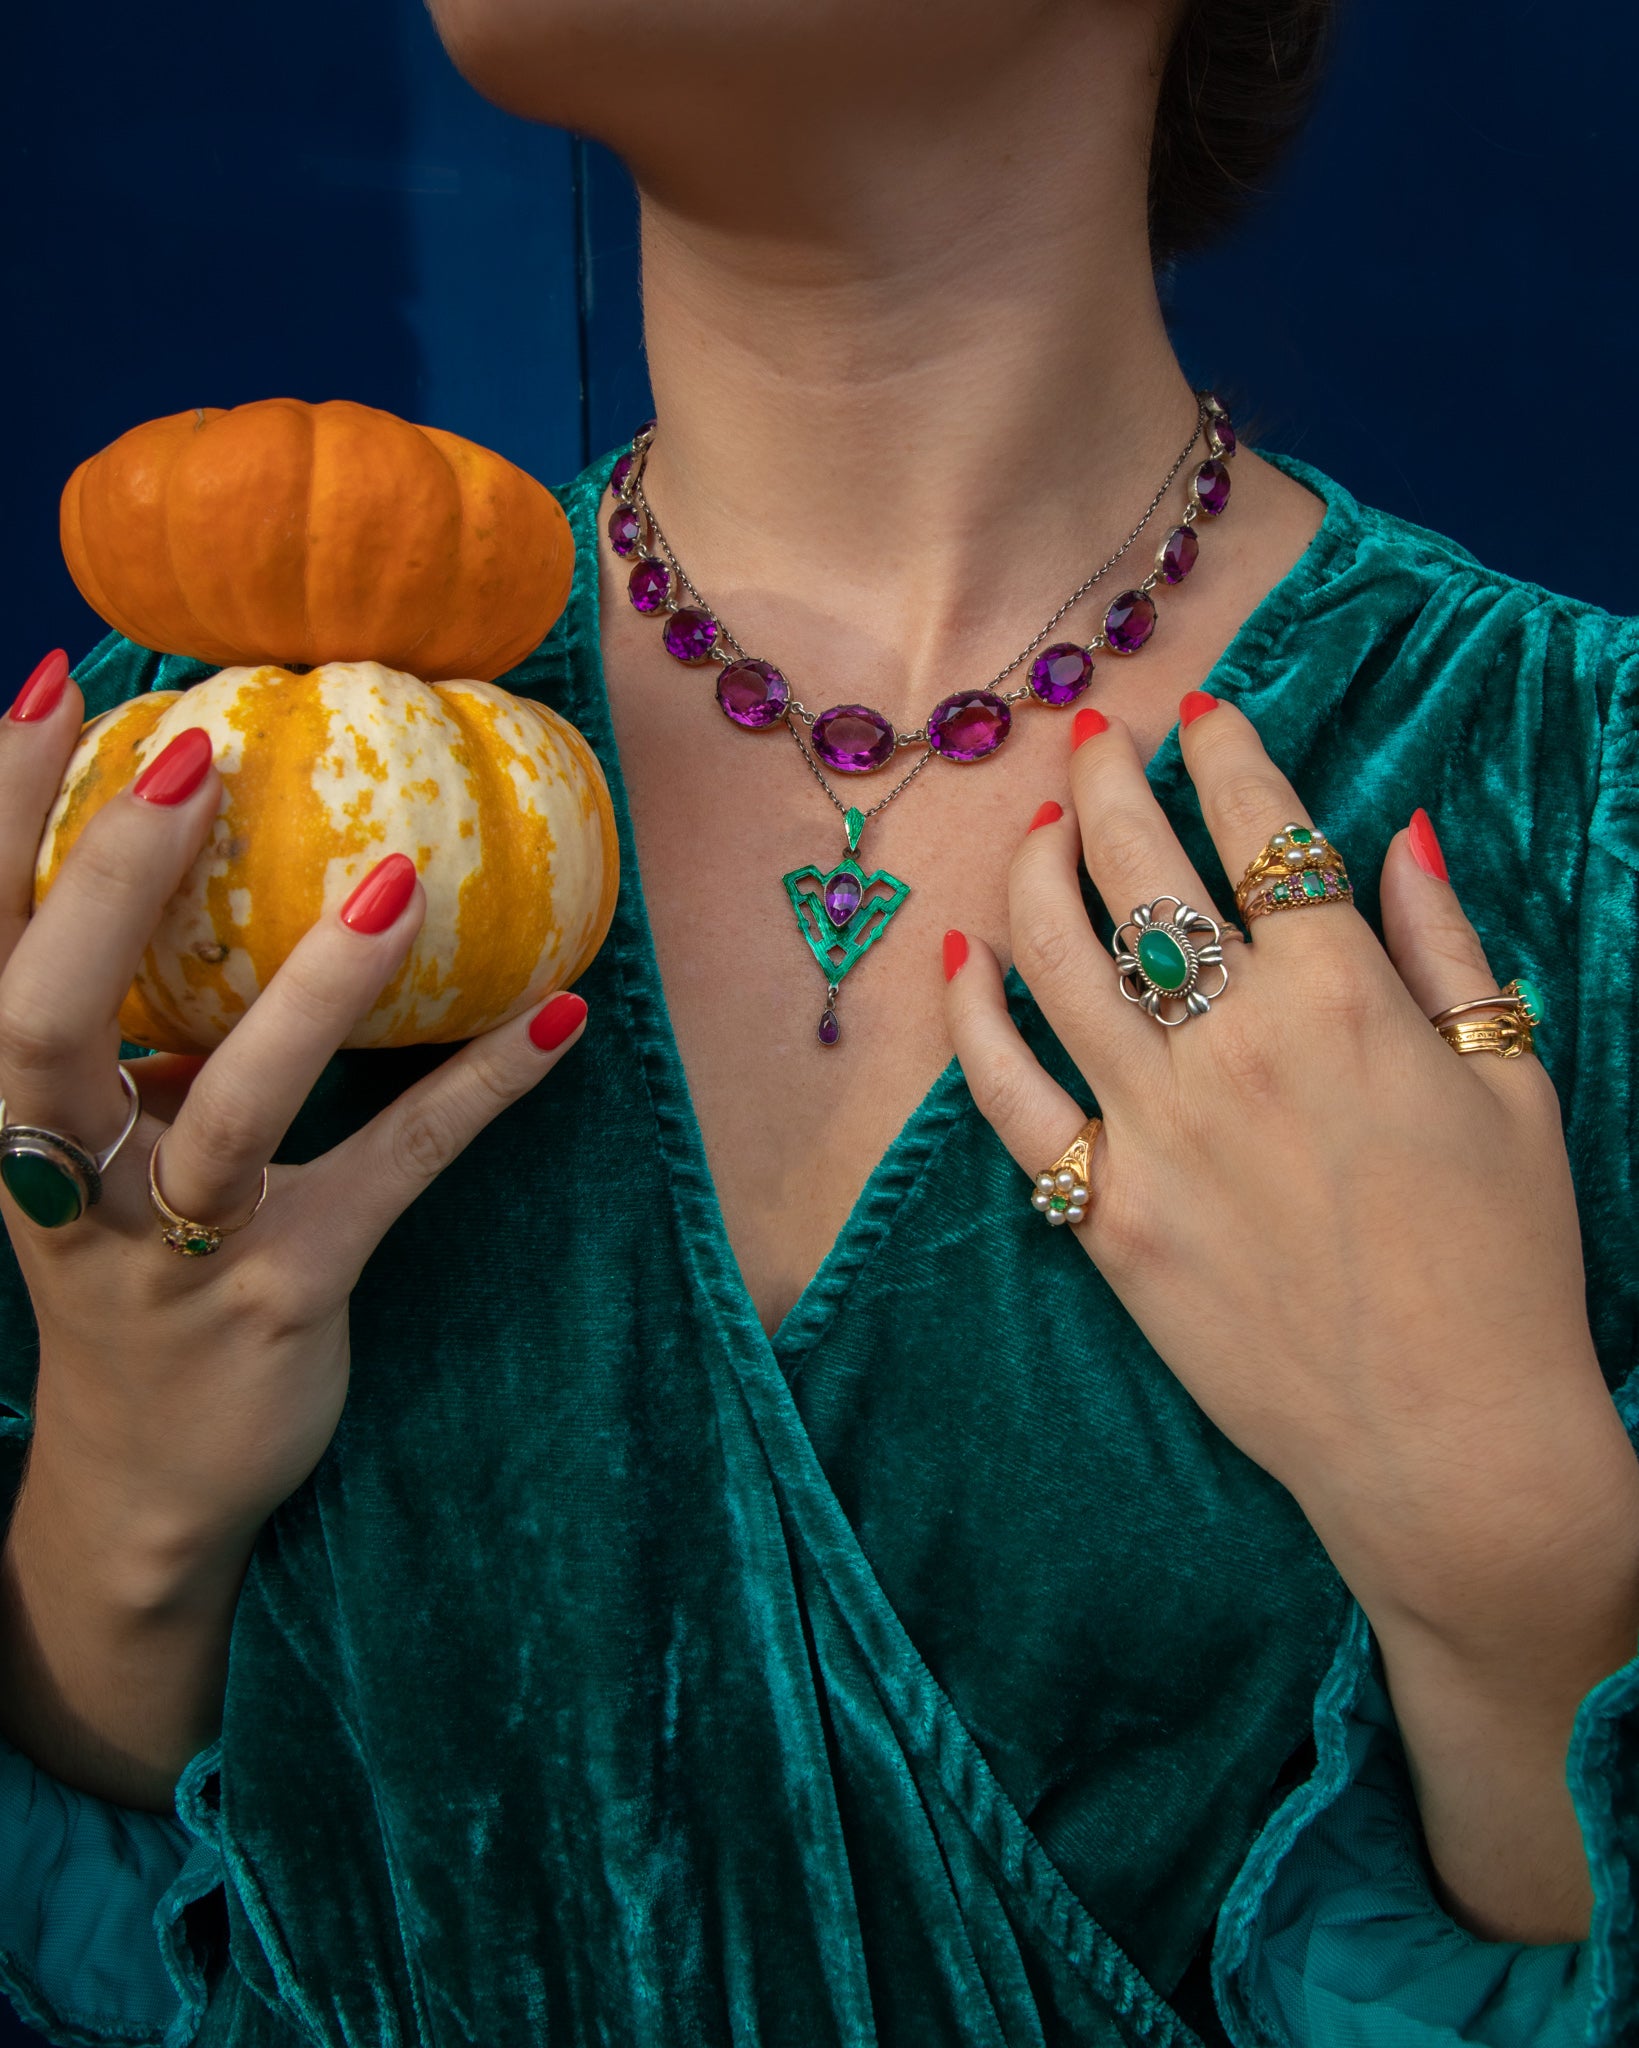 The Best Halloween Jewellery For a Spooktacular Look